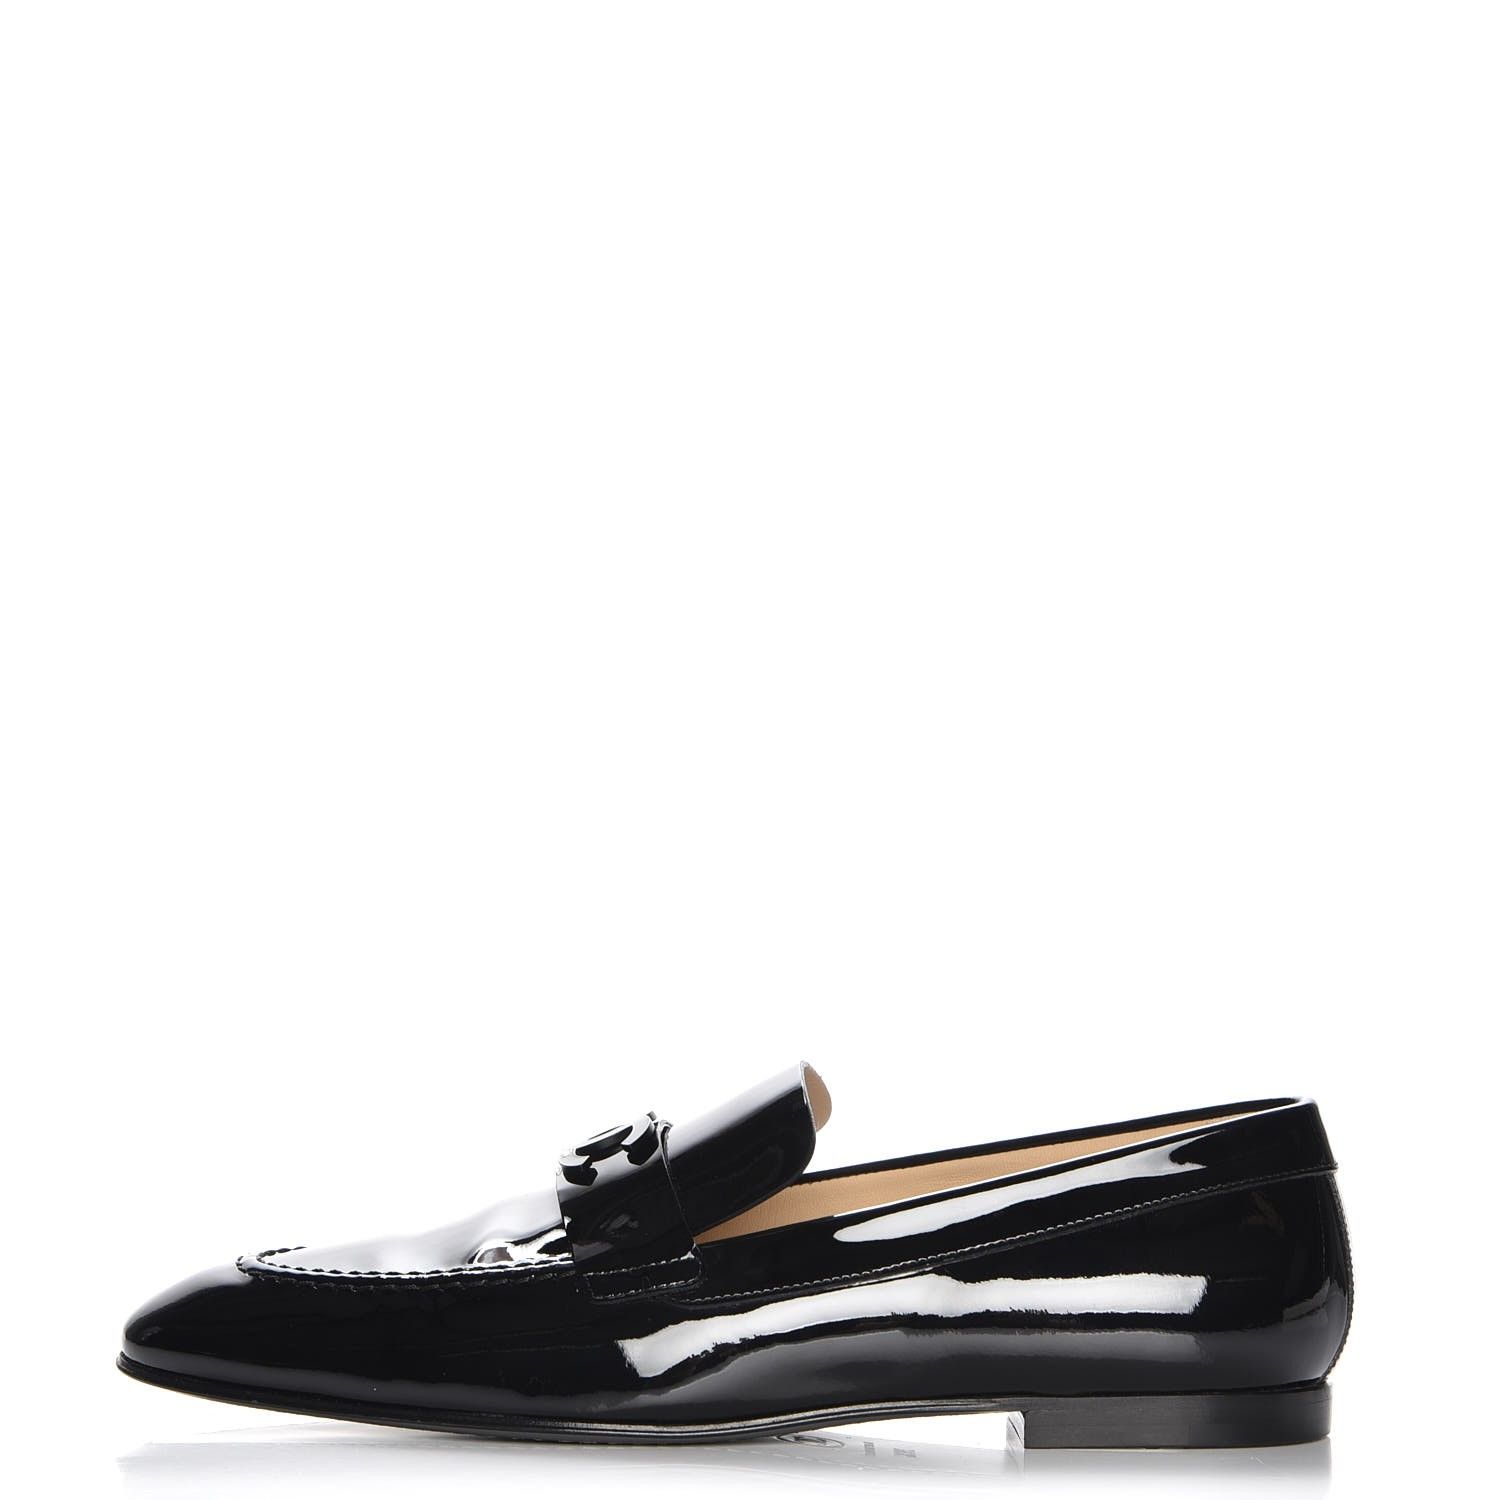 CHANEL Patent Calfskin CC Loafers 39.5 Black 228979